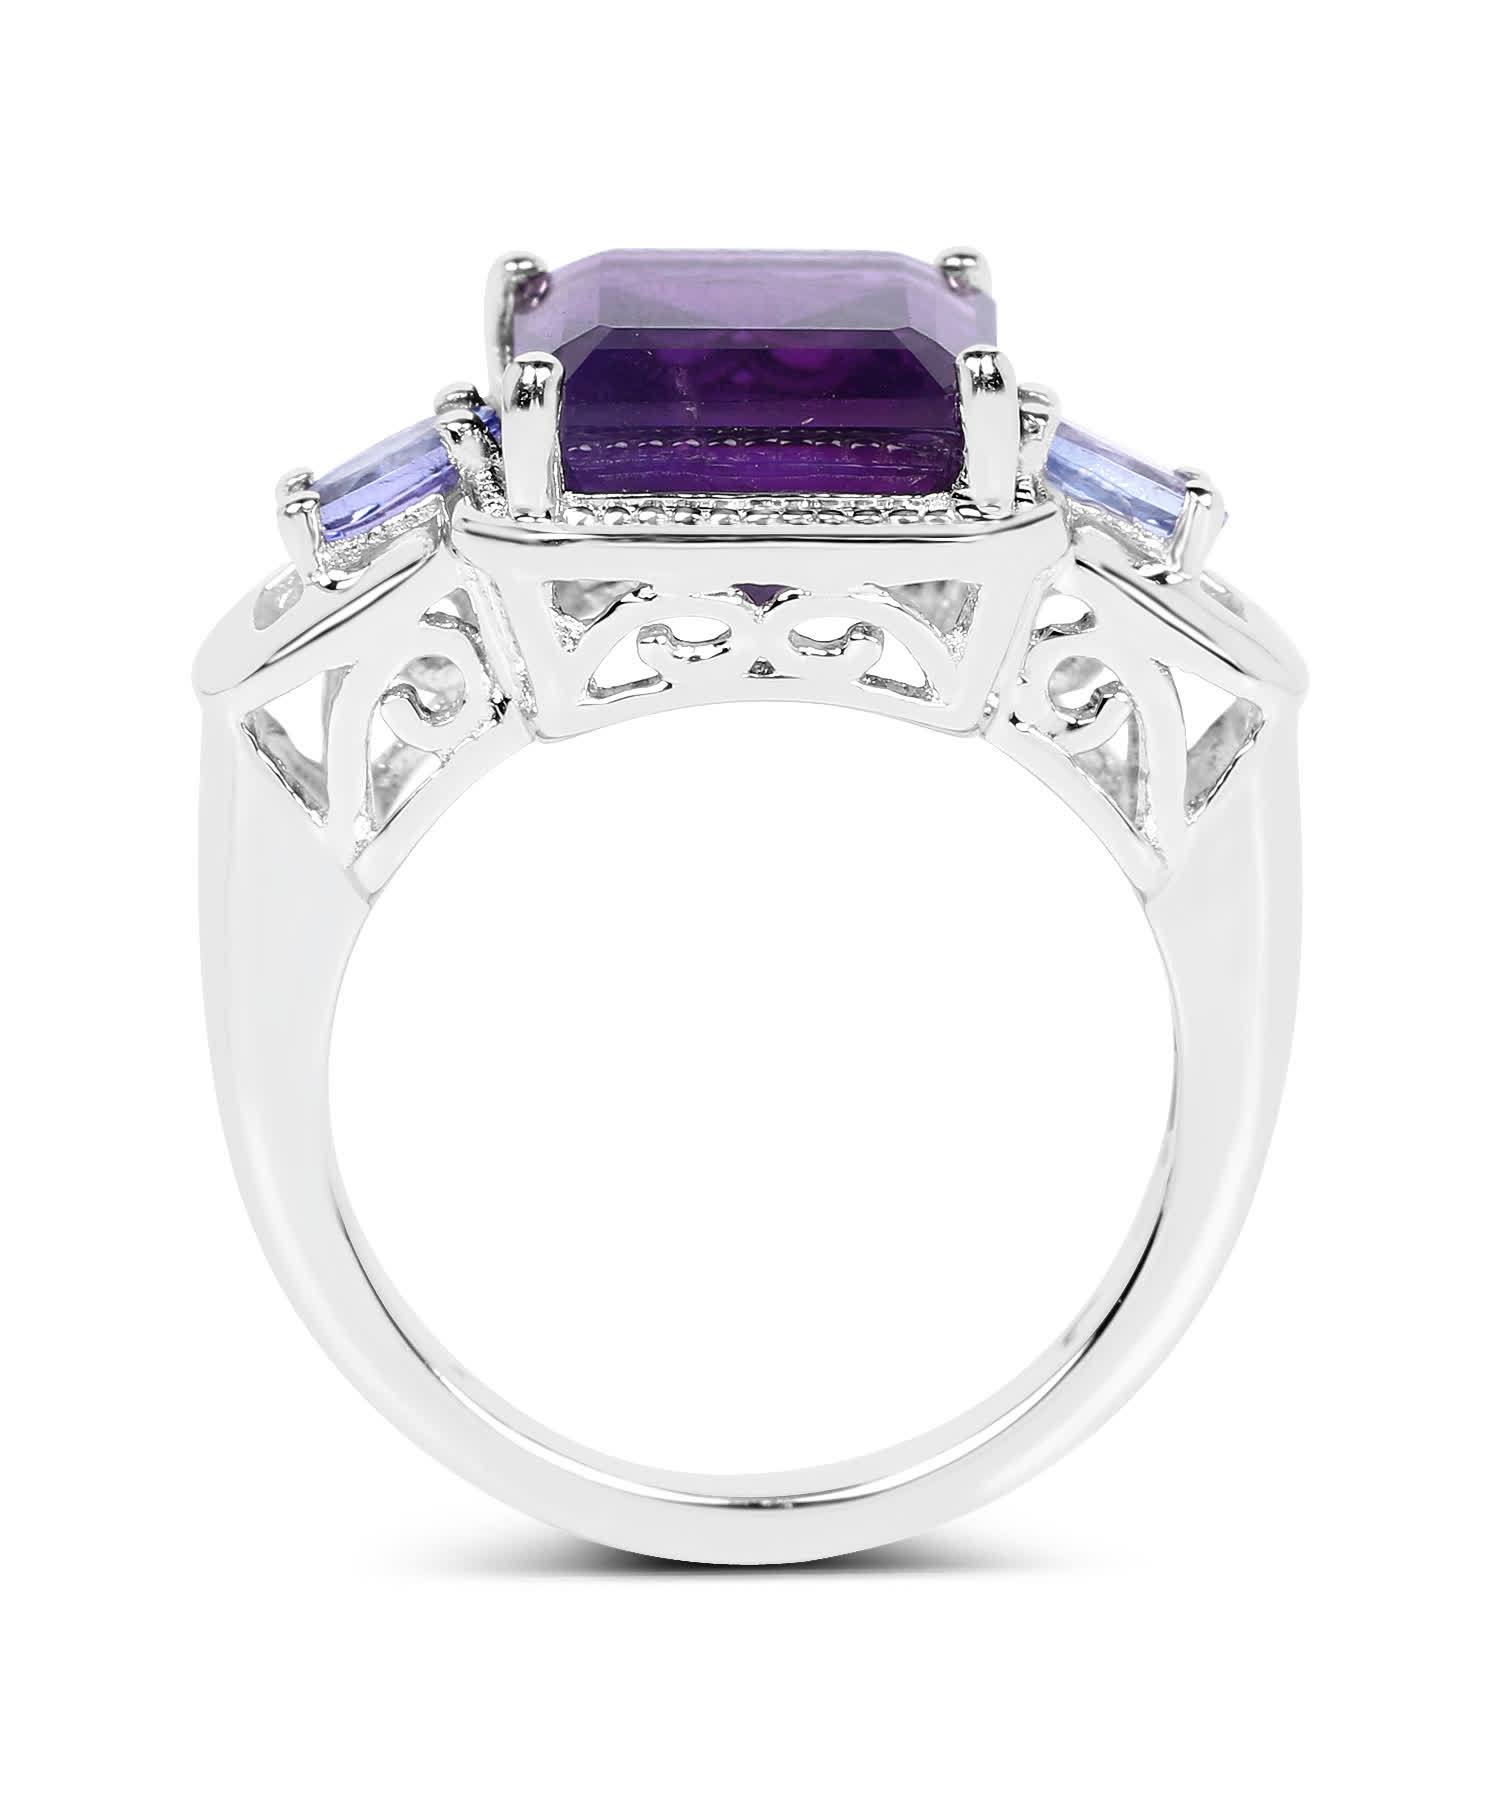 5.15ctw Natural Amethyst and Tanzanite Rhodium Plated 925 Sterling Silver Fashion Cocktail Ring View 2